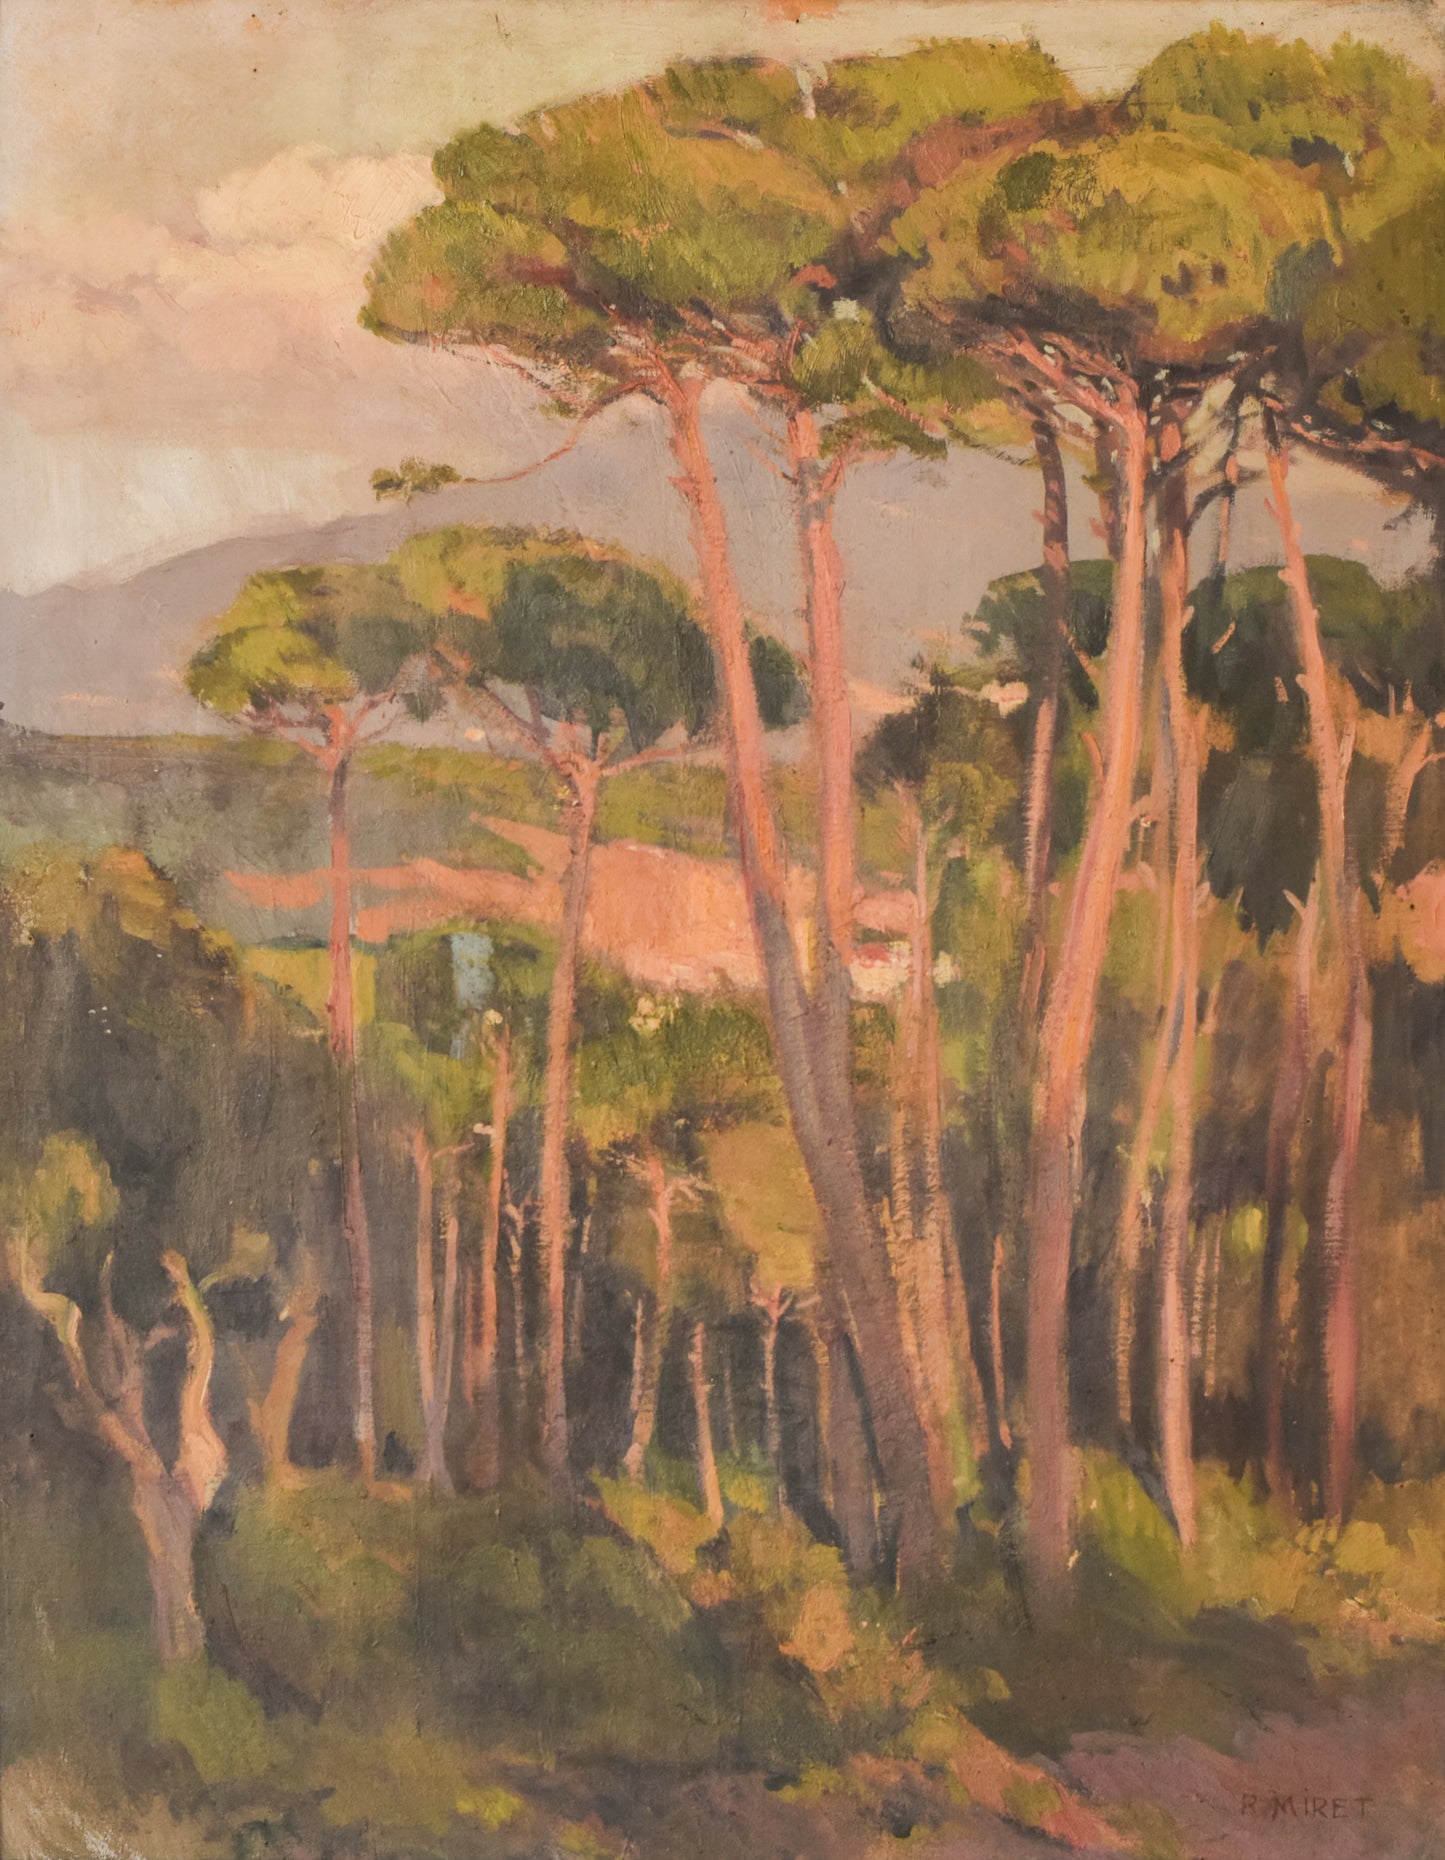 Impressionist Landscape of Trees Bathing In a Golden Light. Oil on Canvas By Ramon Miret